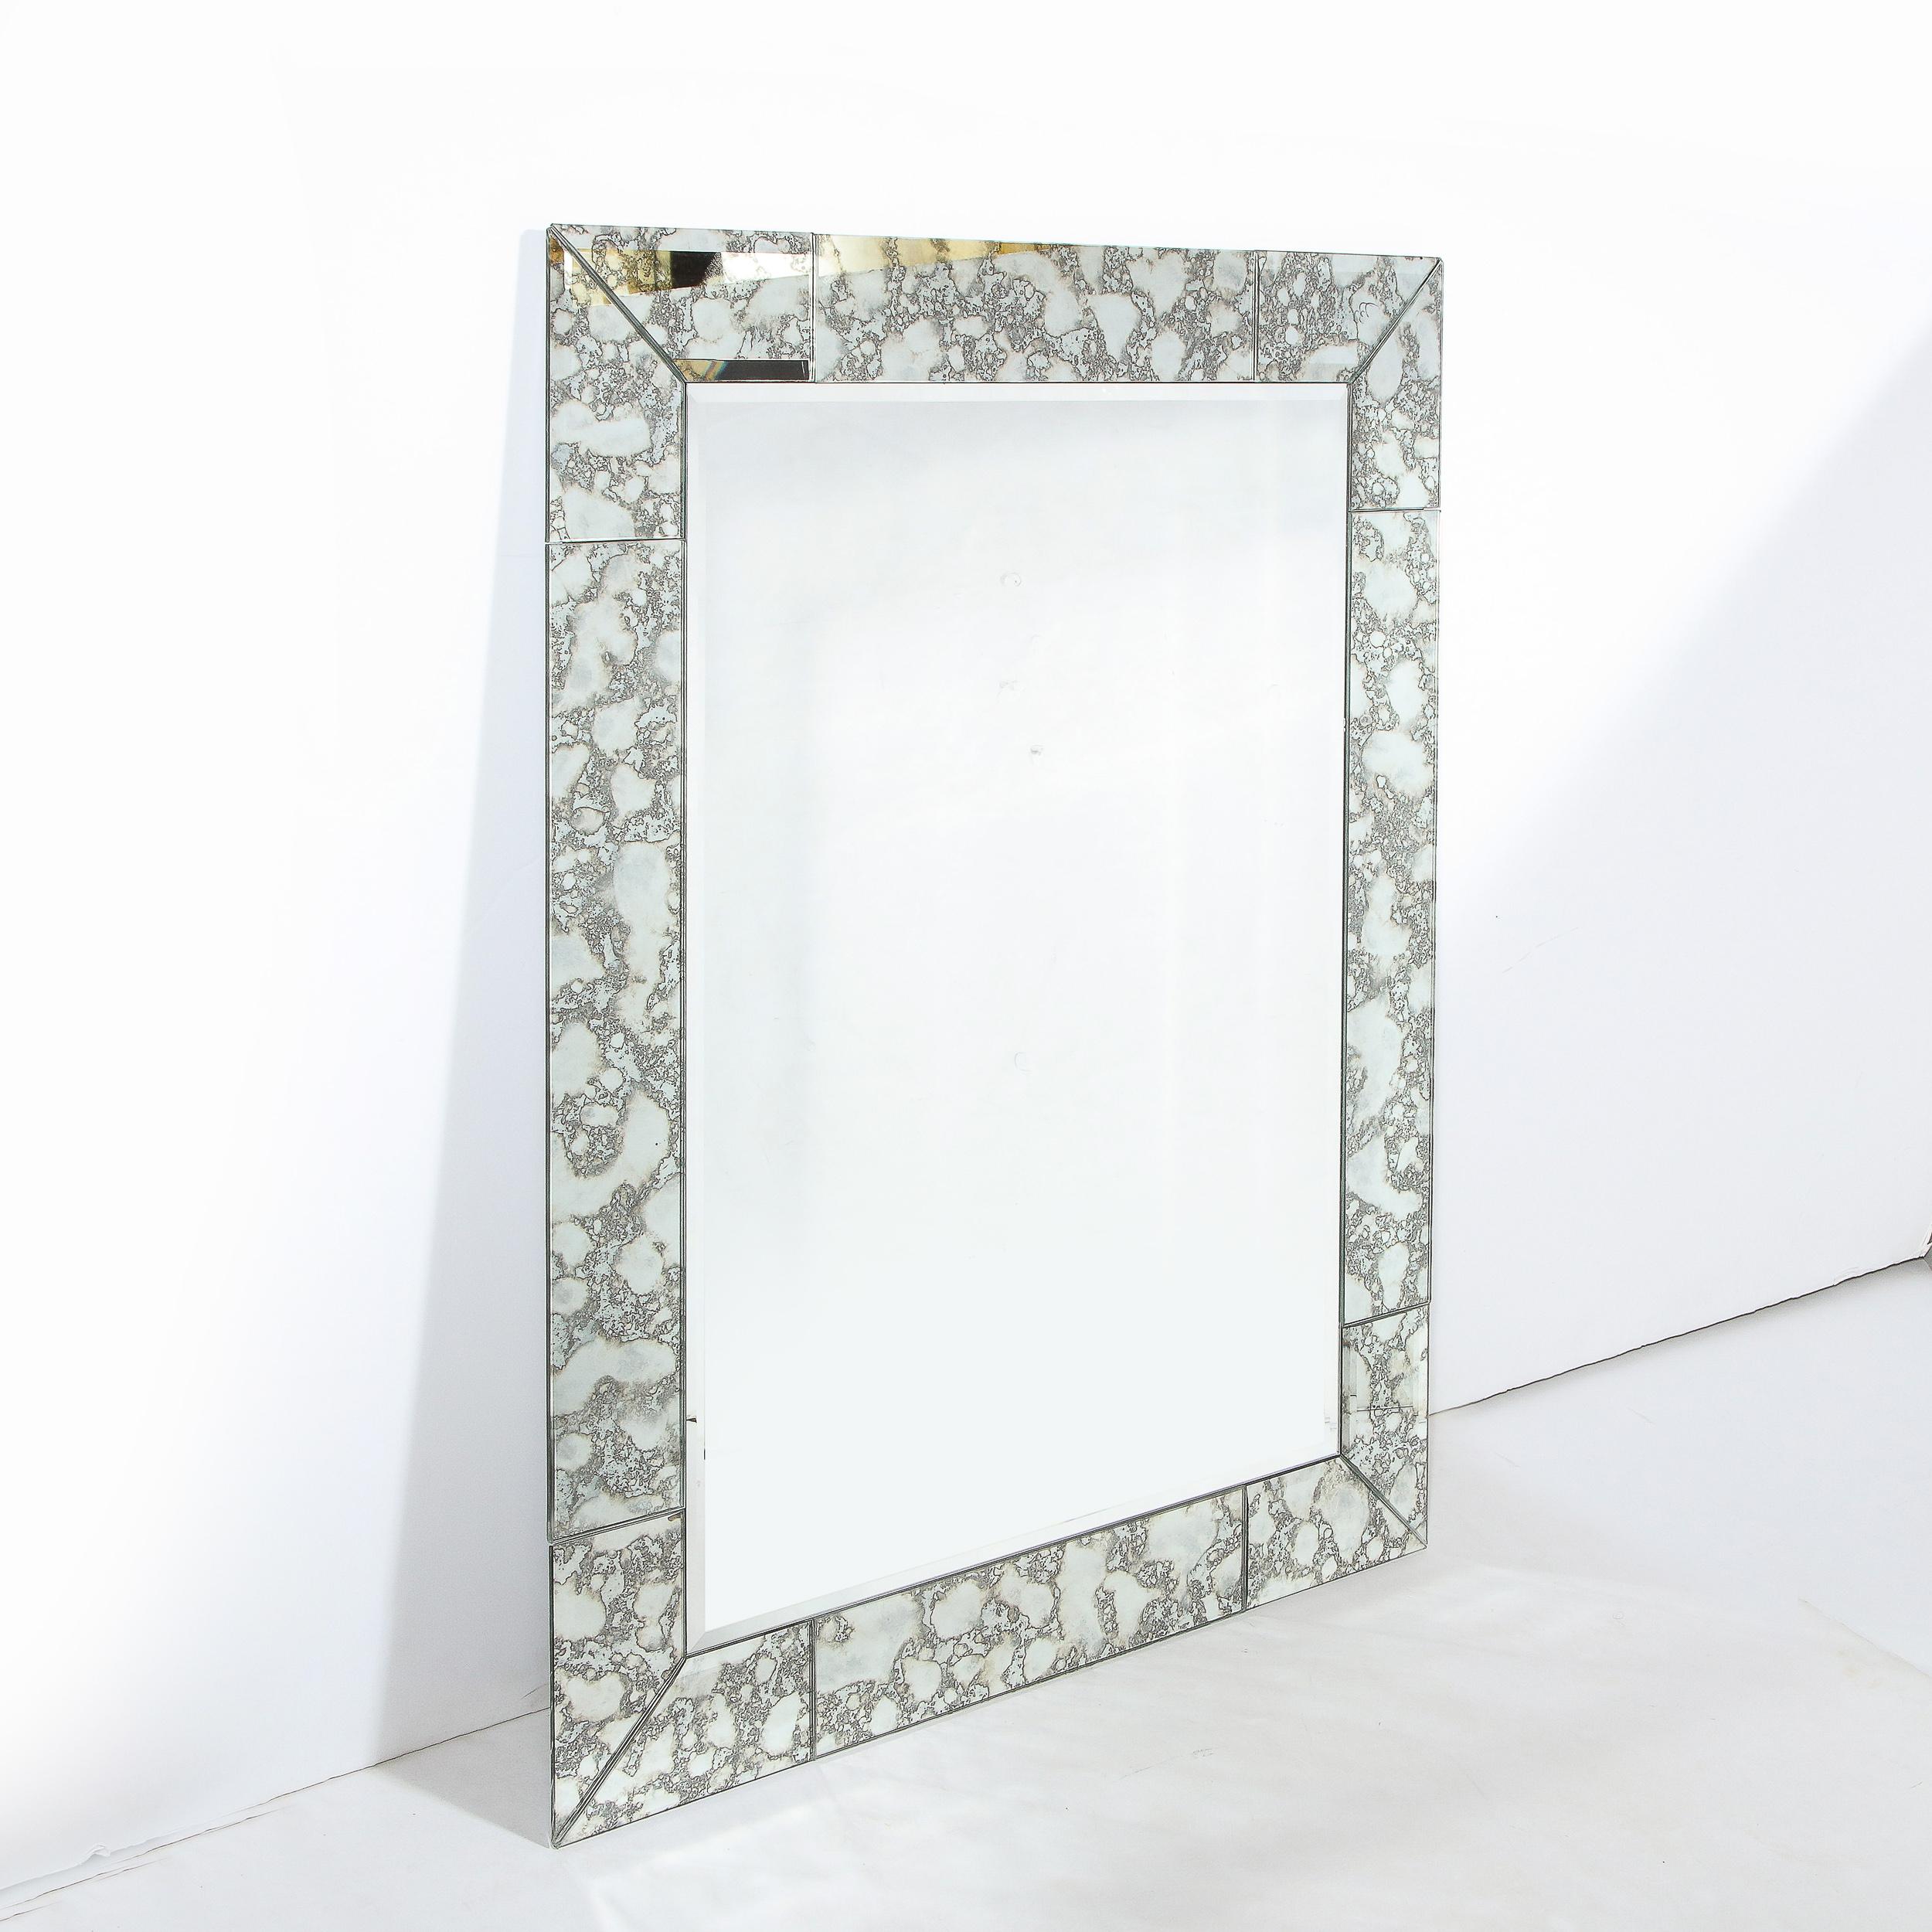 This stunning modern and customizable mirror was realized in the United States. It features a rectangular form with a tessellated border composed of rectilinear mirrored segments with beveled edges that wrap around the perimeter of the piece. The